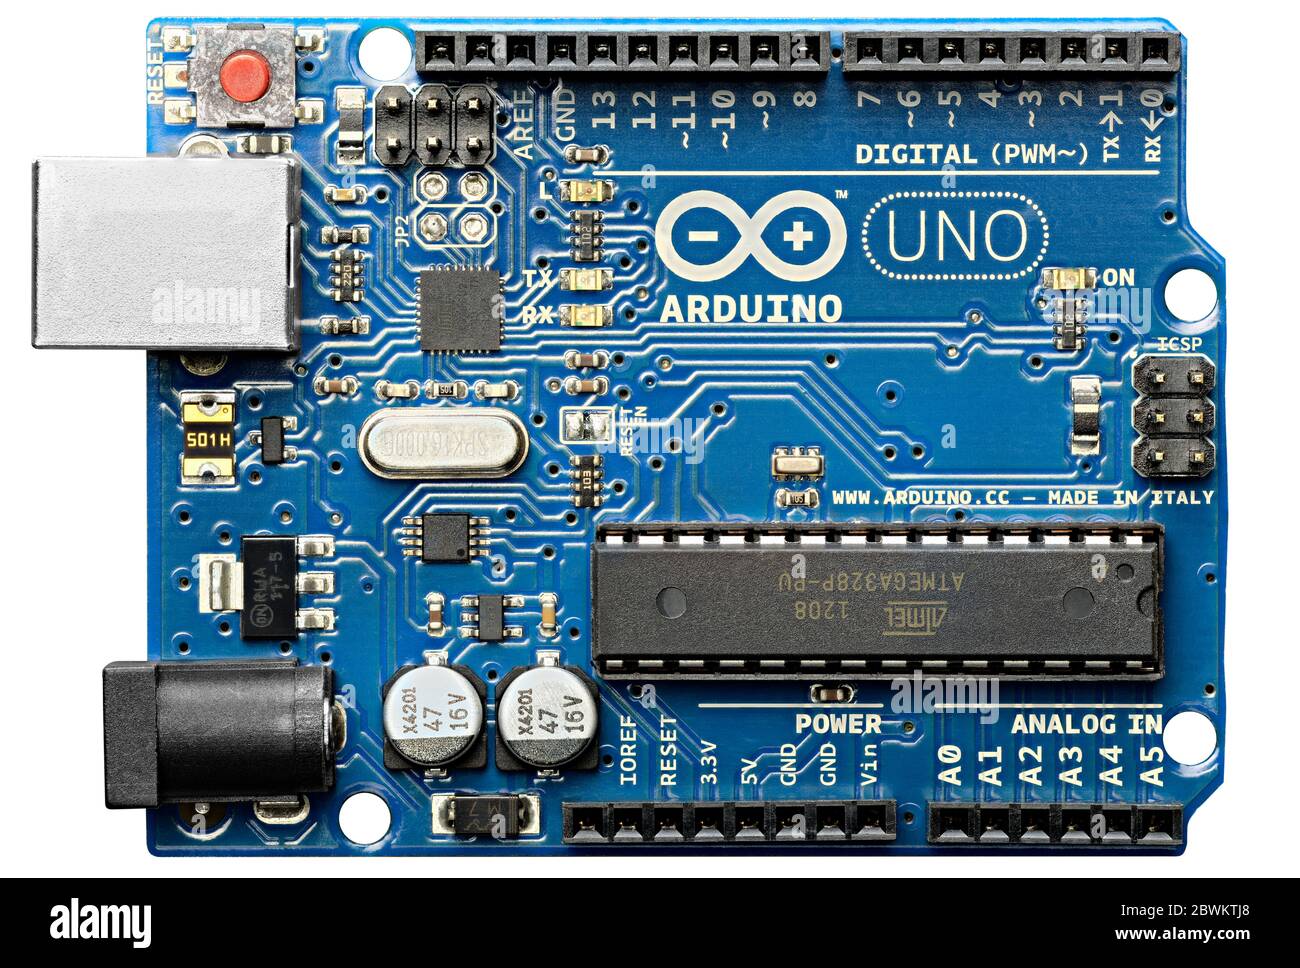 DURBAN SOUTH AFRICA - MARCH 28 2020: Arduino Uno, open source microcontroller development board, isolated on a white background Stock Photo